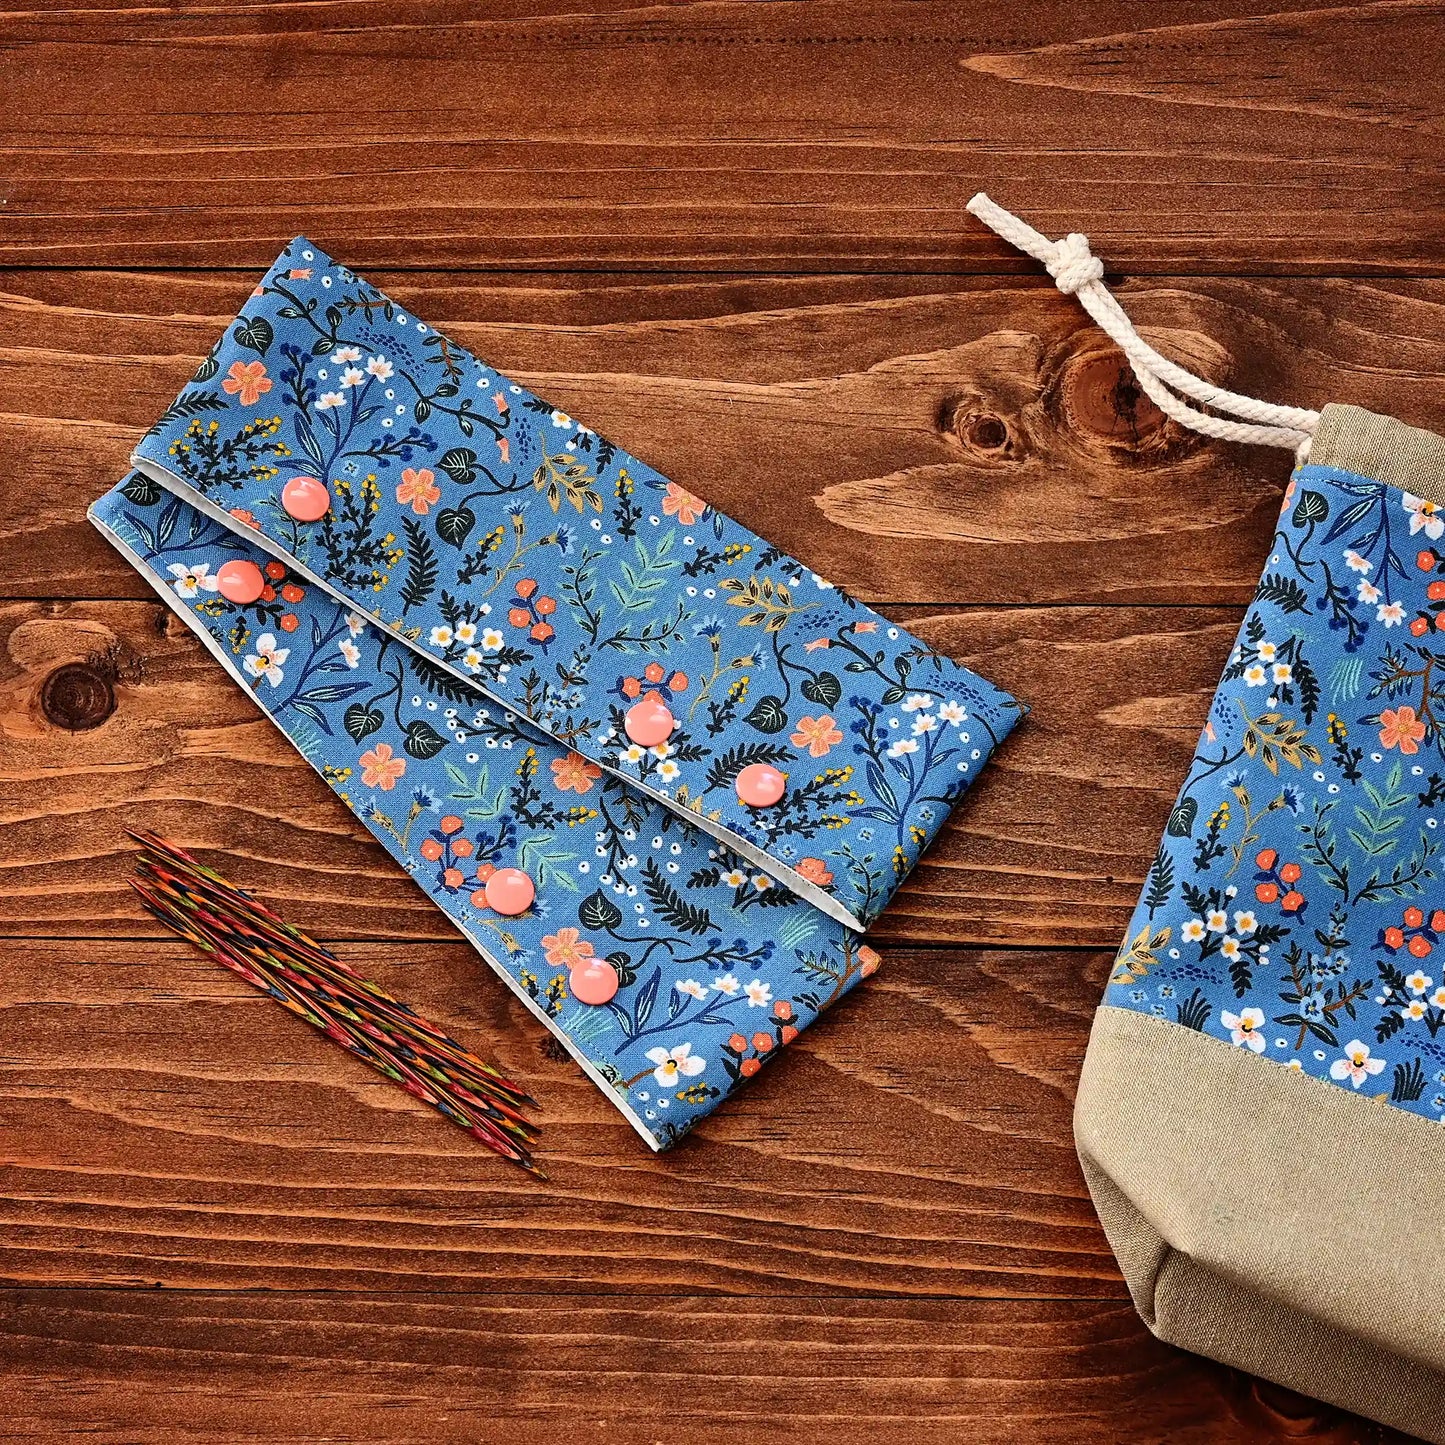 Pretty blue floral DPN cozies, meant to keep your knitting securely on the needles when you aren't working on it.  These are made from a blue floral on the outside and a delicate white floral inside.  They close with your choice of blue or peach snaps.  Made in Nova Scotia, Canada by Yellow Petal Handmade.